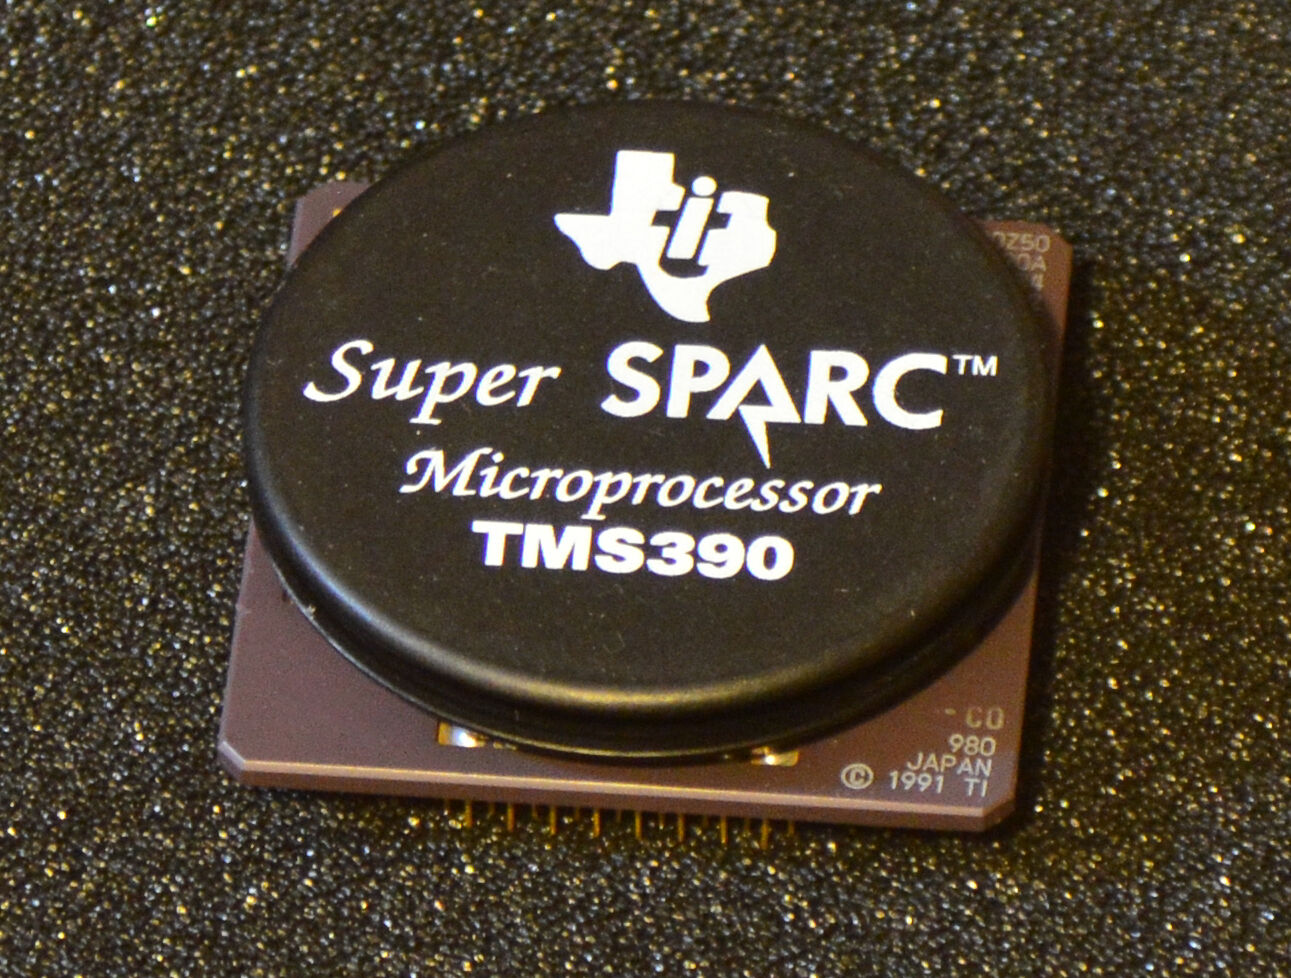 Vintage CPU, TI Super Sparc TMS390 from 1991, Gold and purple ceramic